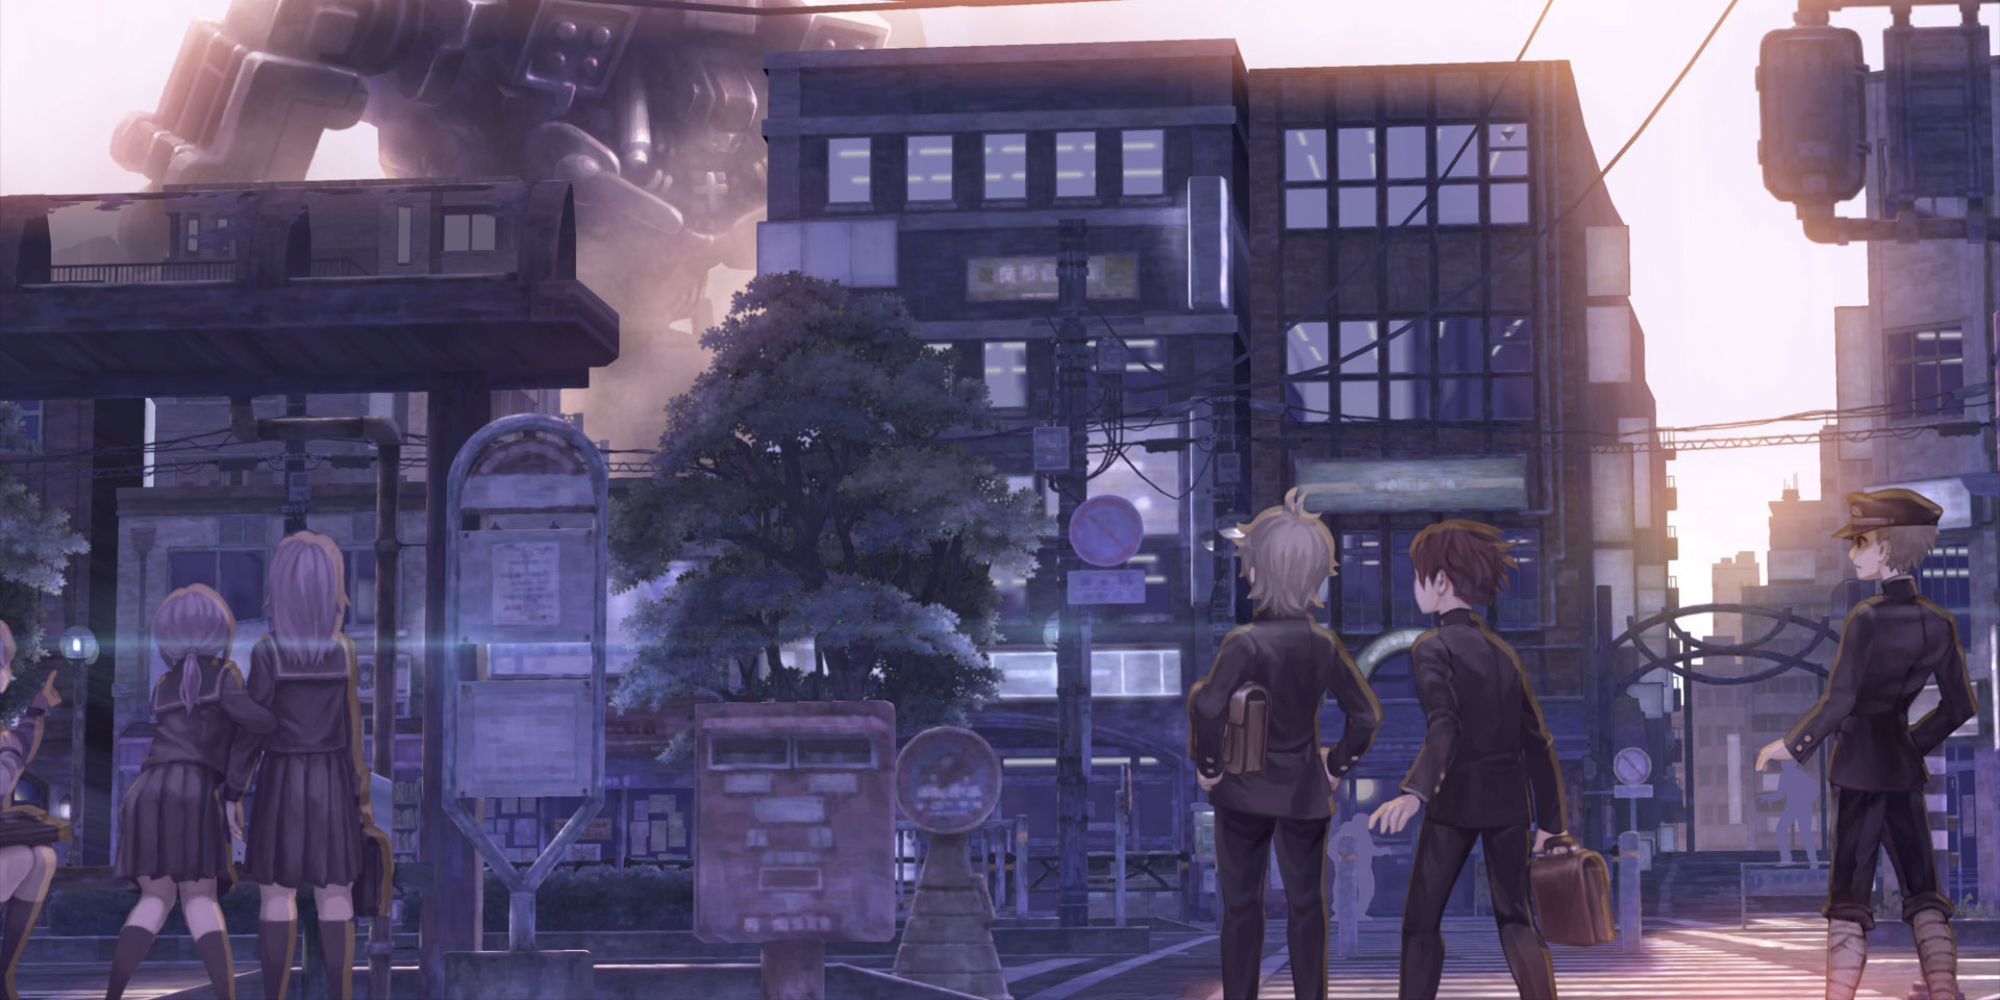 A group of students look up at a giant mech in a city